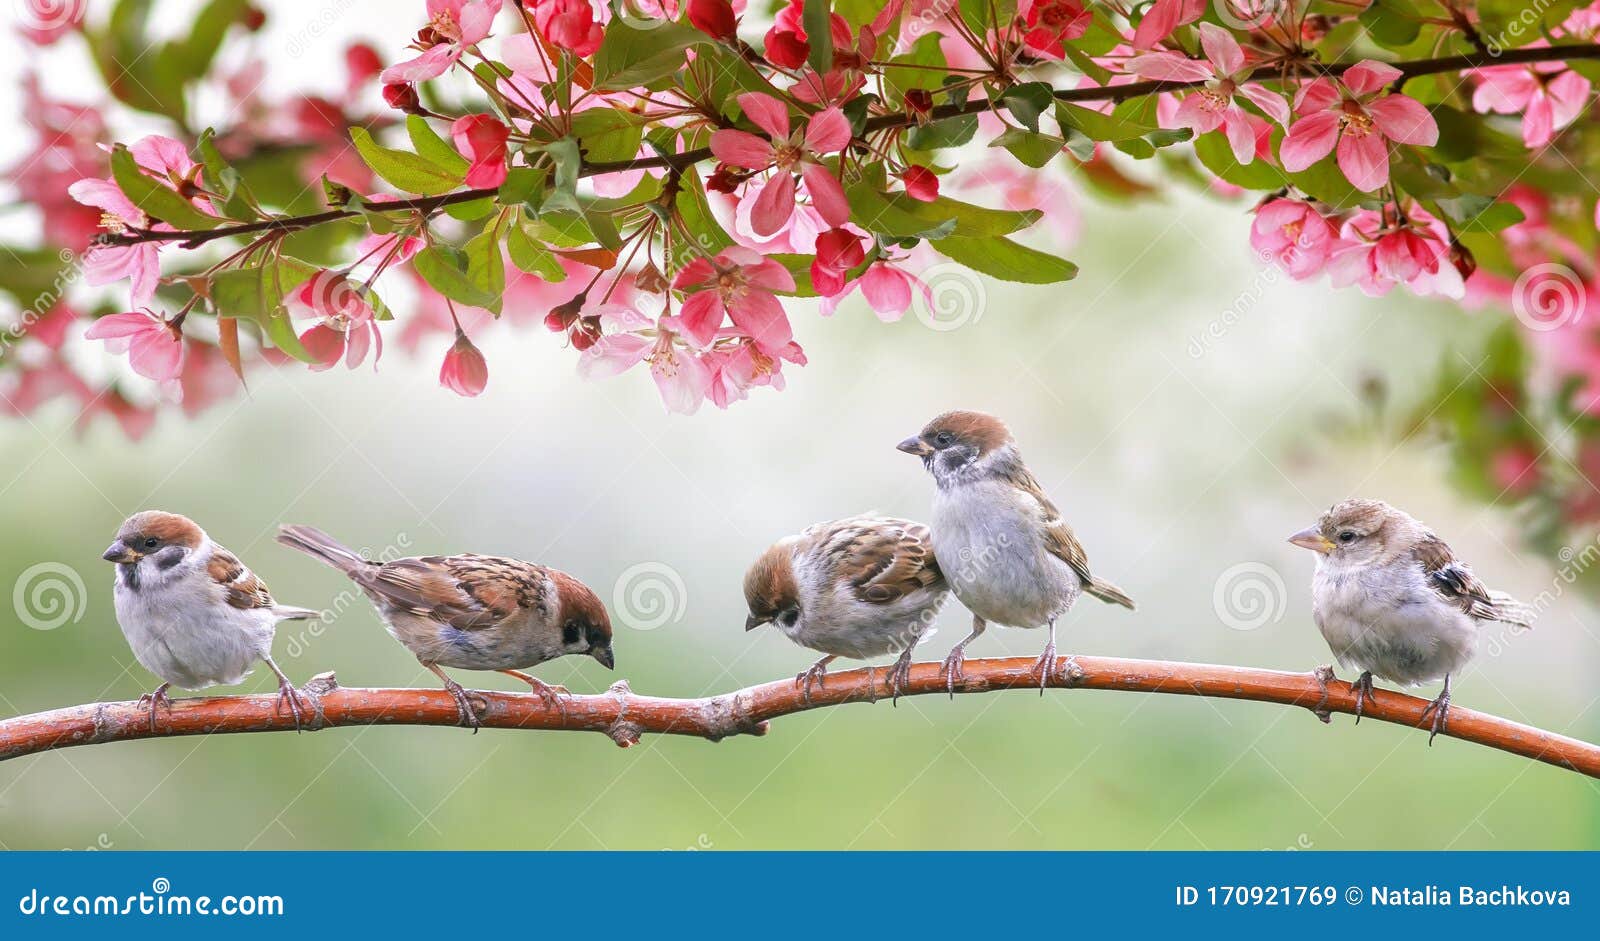 little birds sparrows may sit in the sunny garden among the flowering branches of pink apple